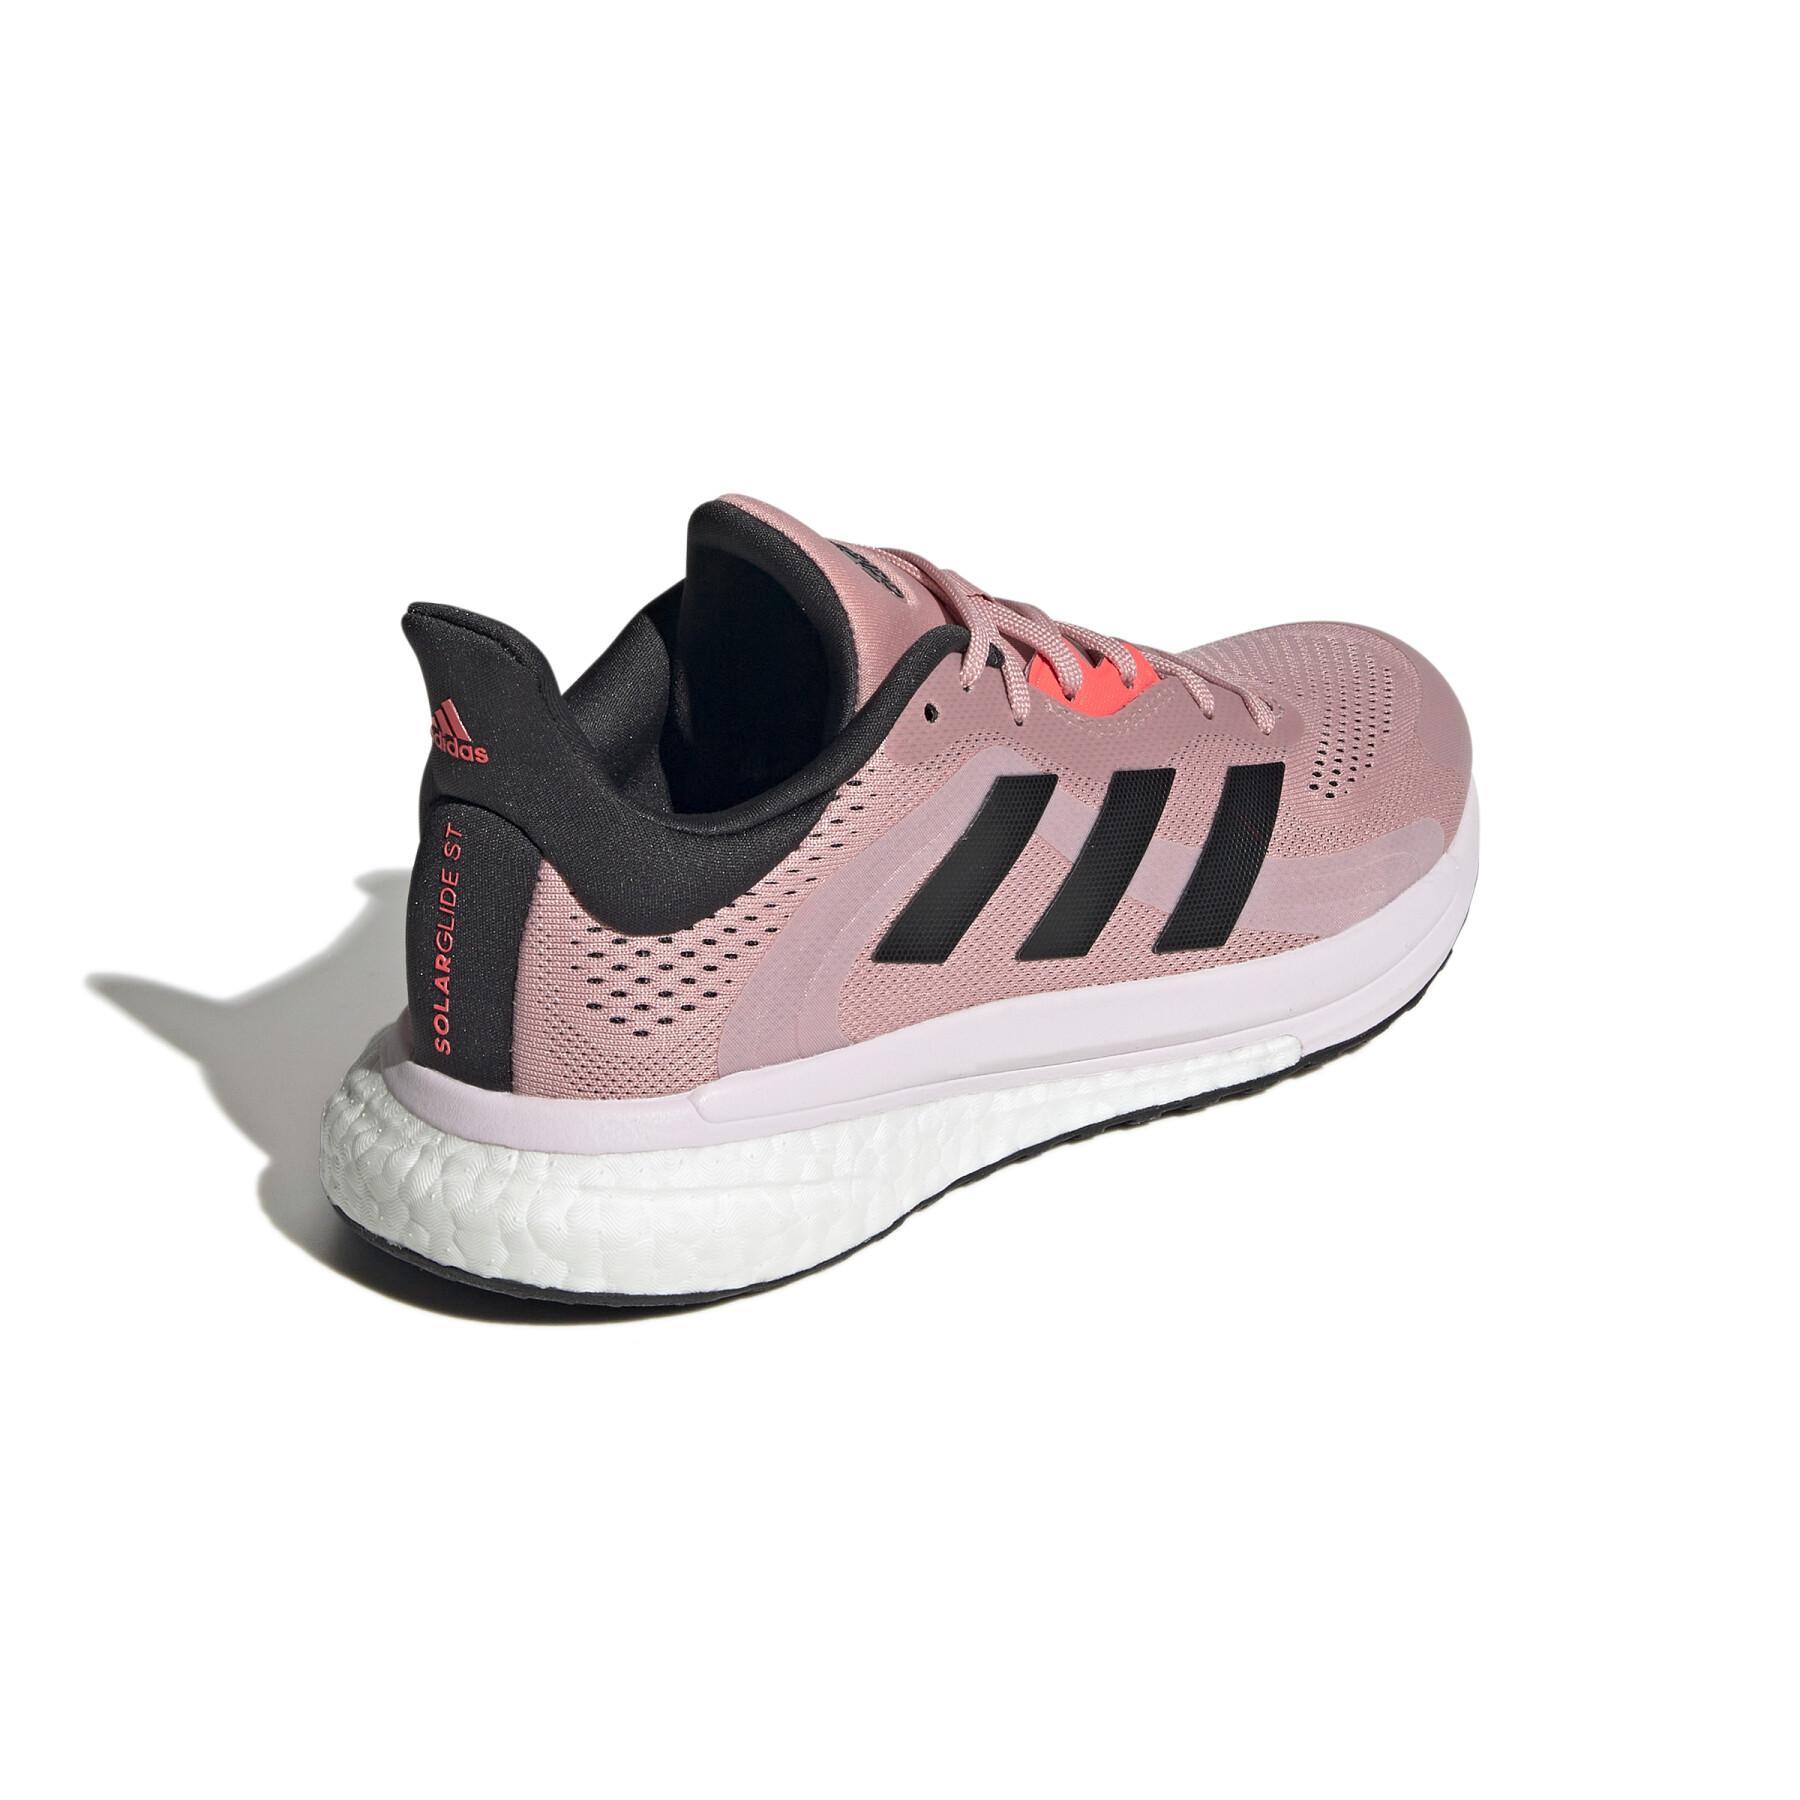 Women's shoes adidas SolarGlide 4 ST